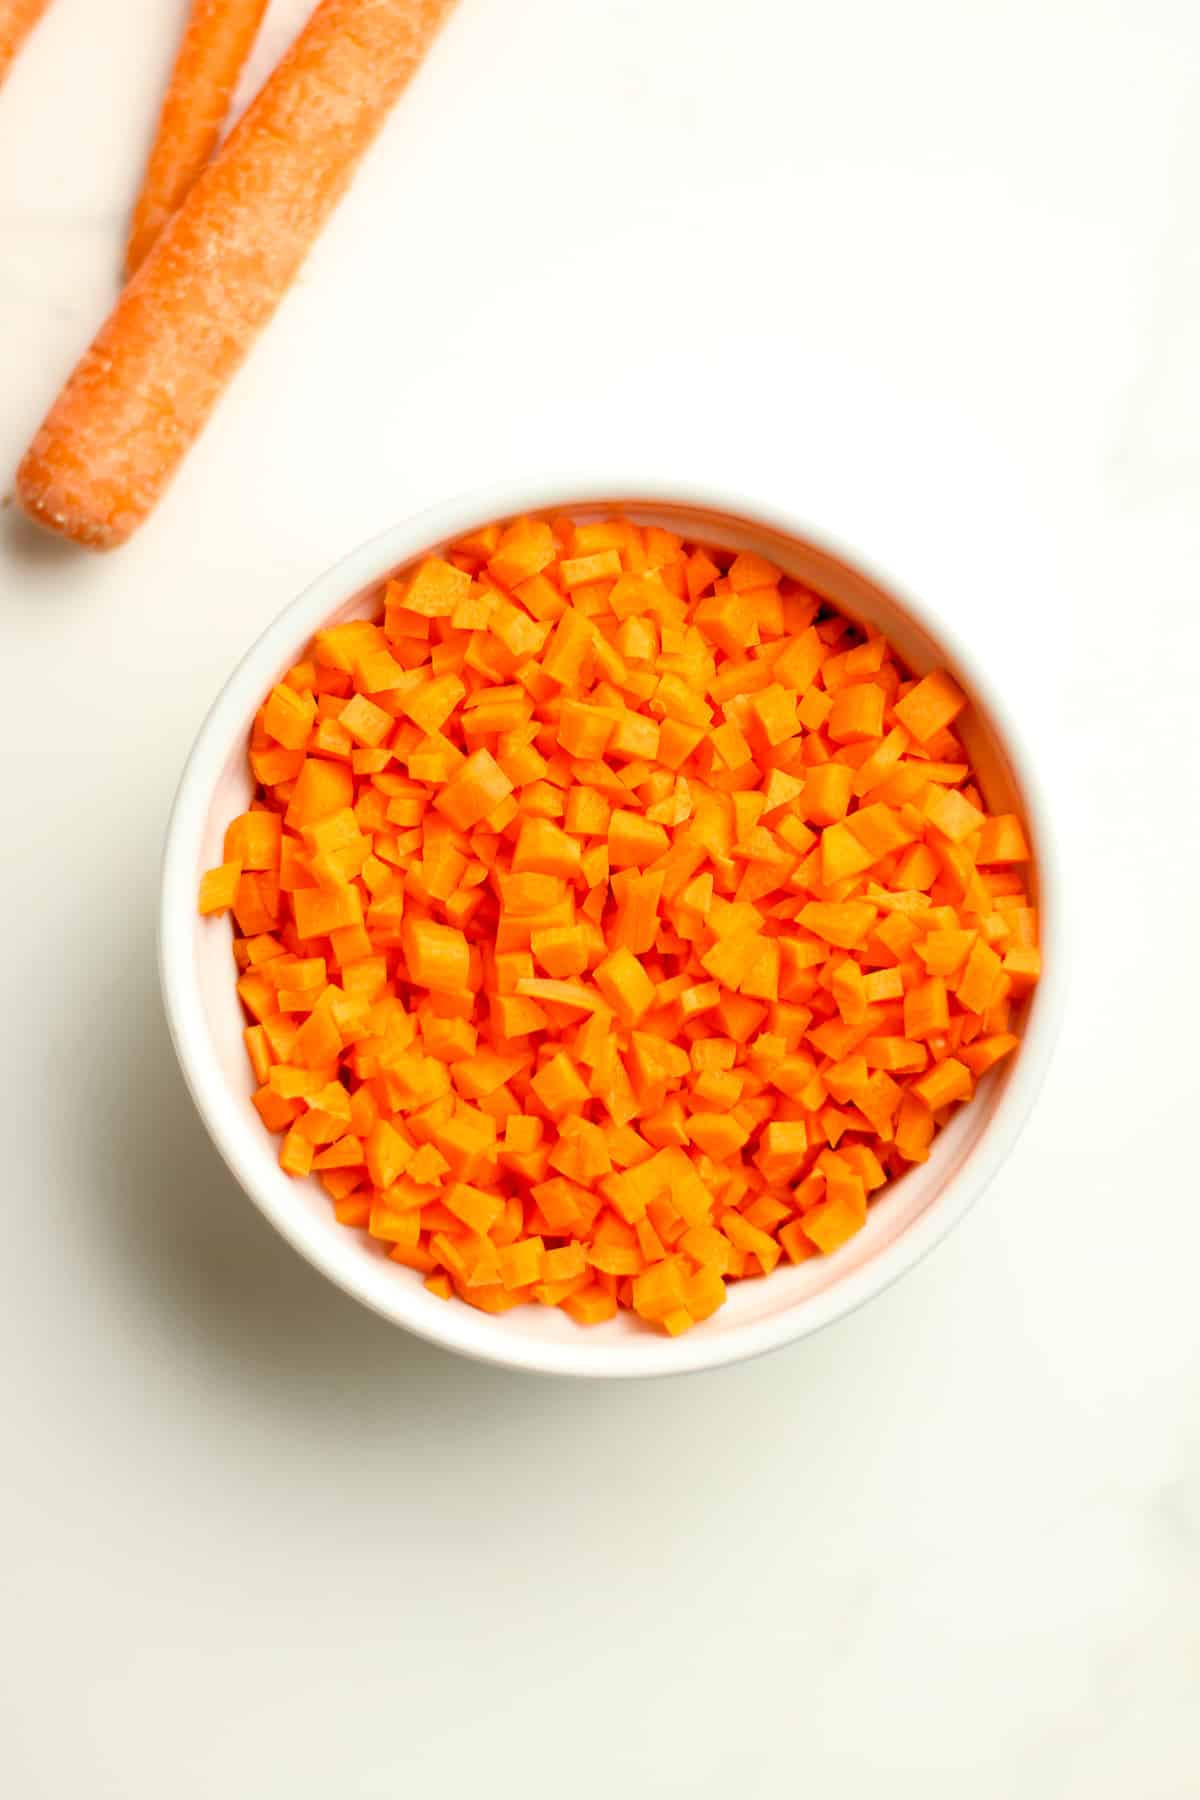 A small bowl of diced carrots with carrot sticks.